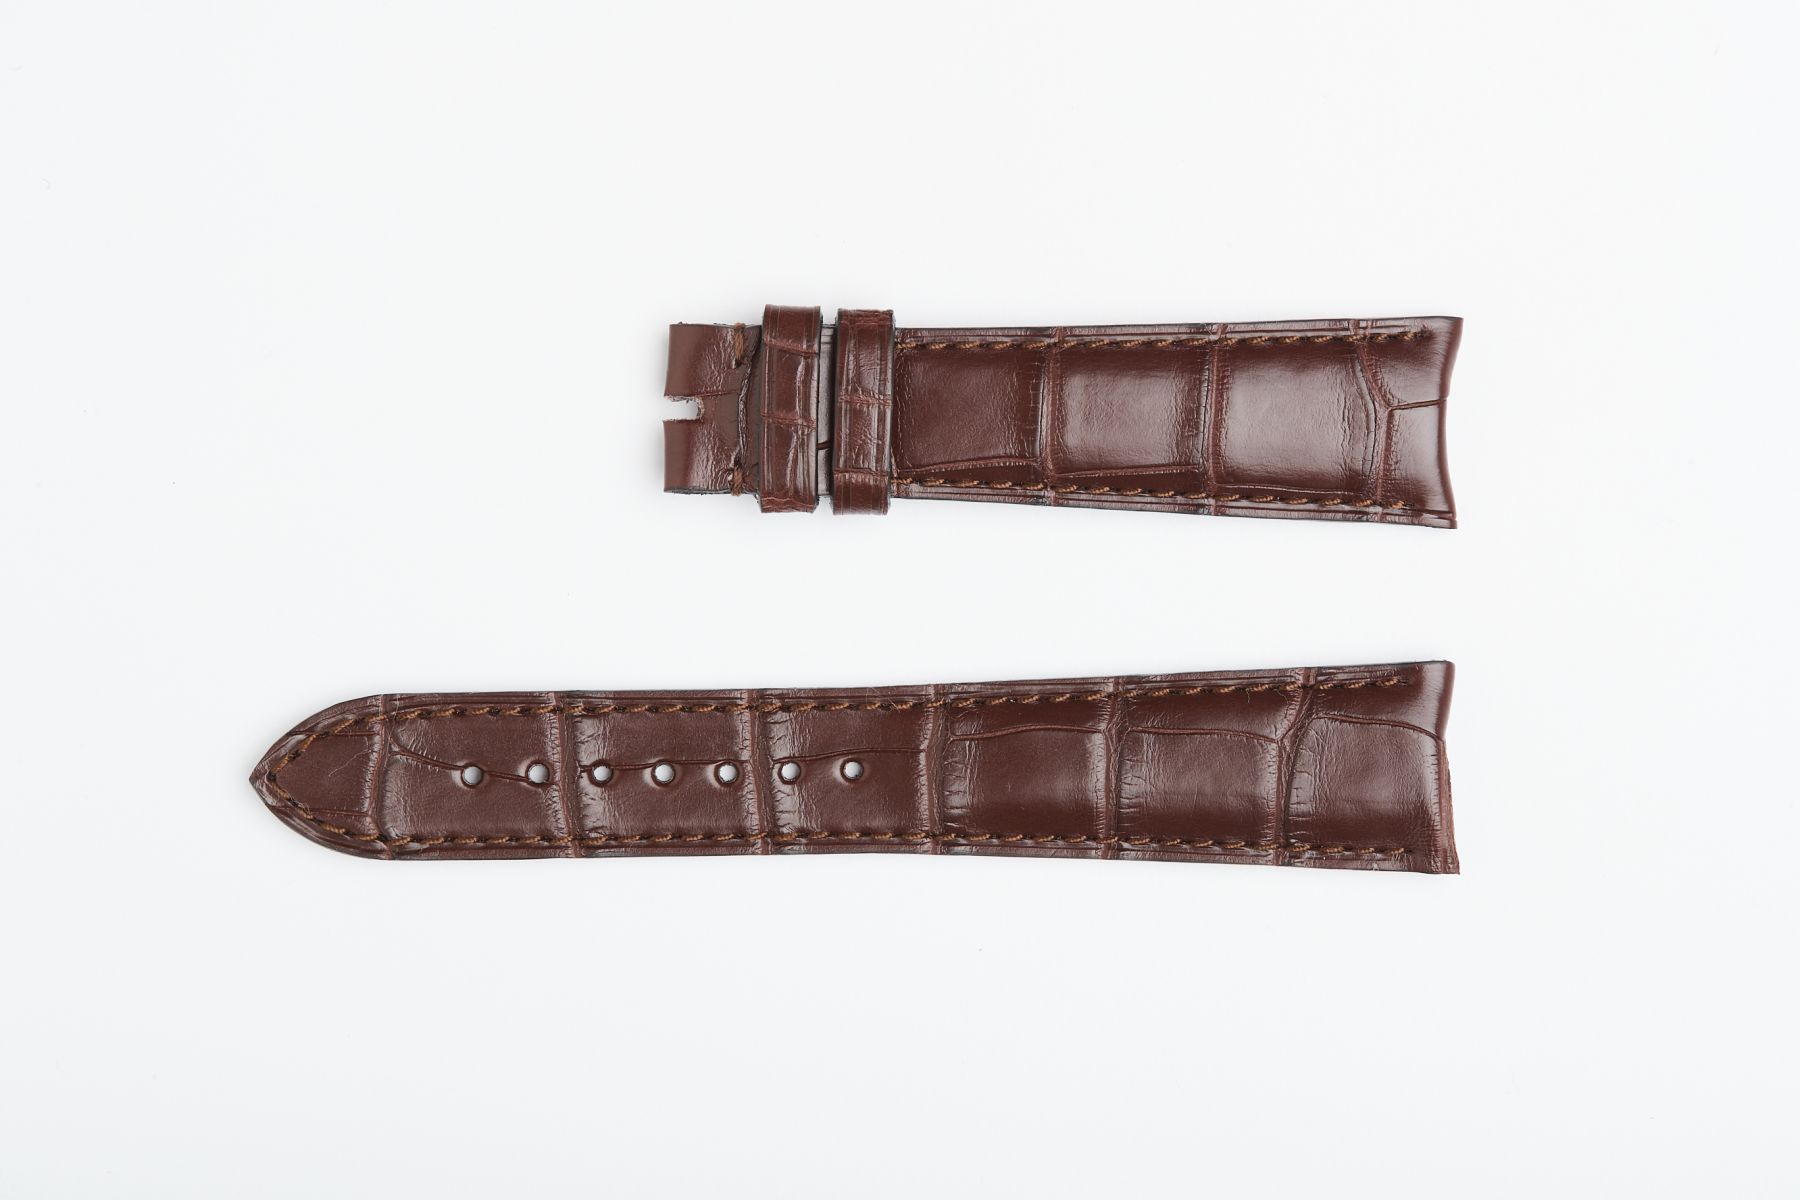 Rolex Cellini Dual / Time / Date Custom made strap in Chocolate Brown Matte Alligator leather. Curved lugs